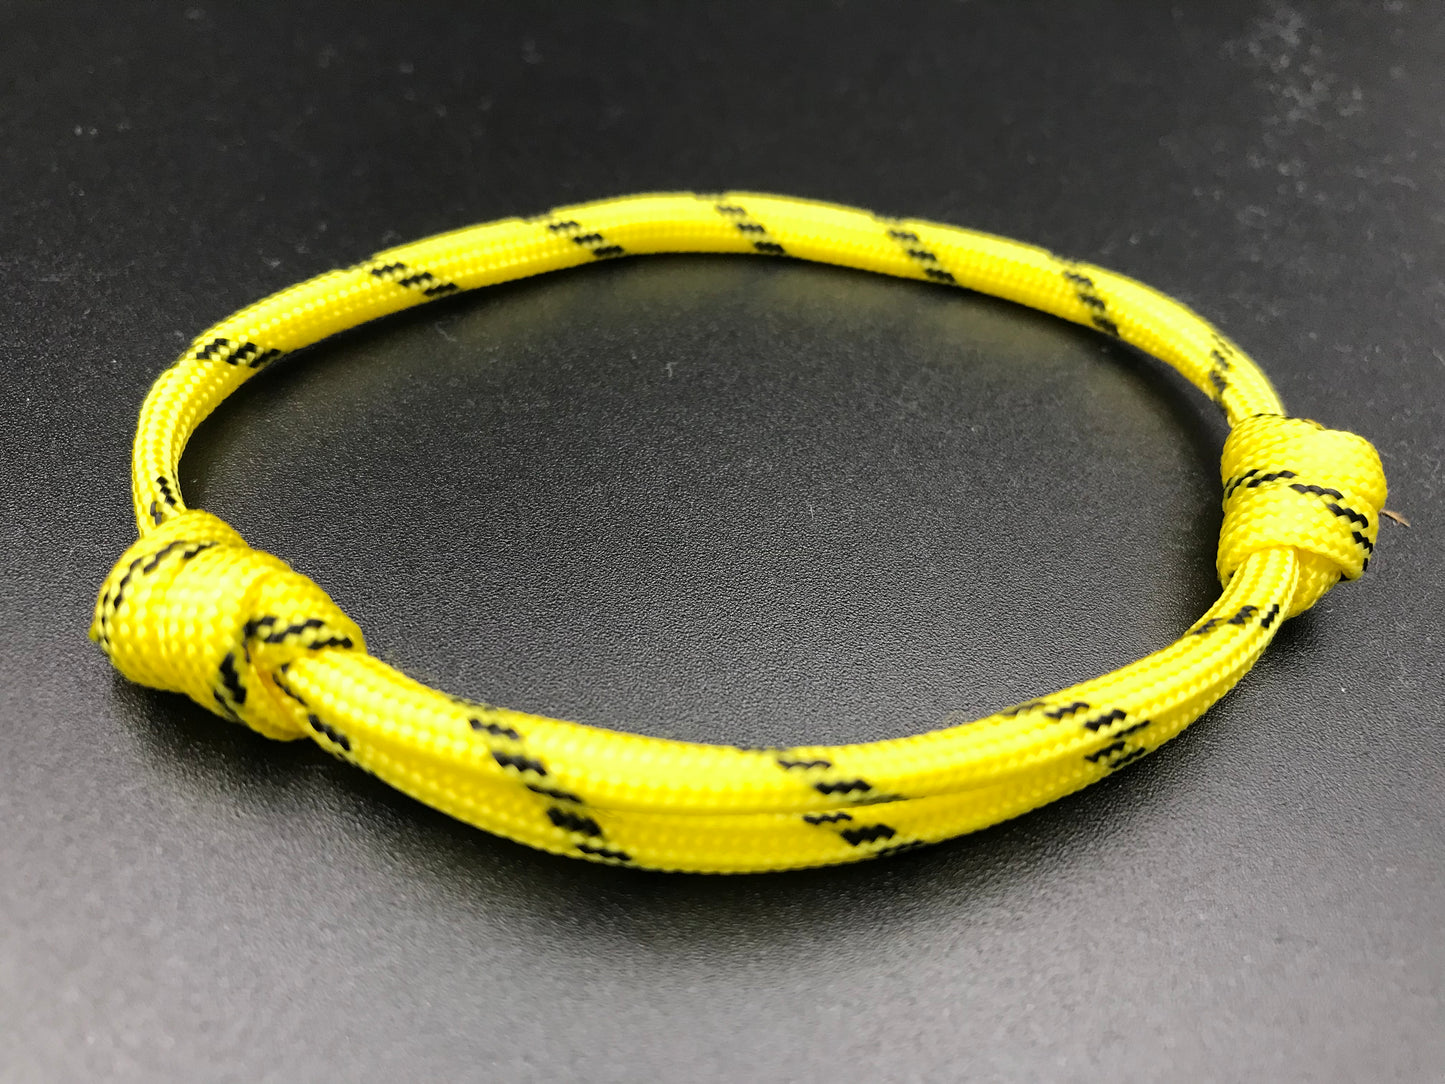 Paracord Friendship bracelet in yellow with black stripes lightweight and fully adjustable 